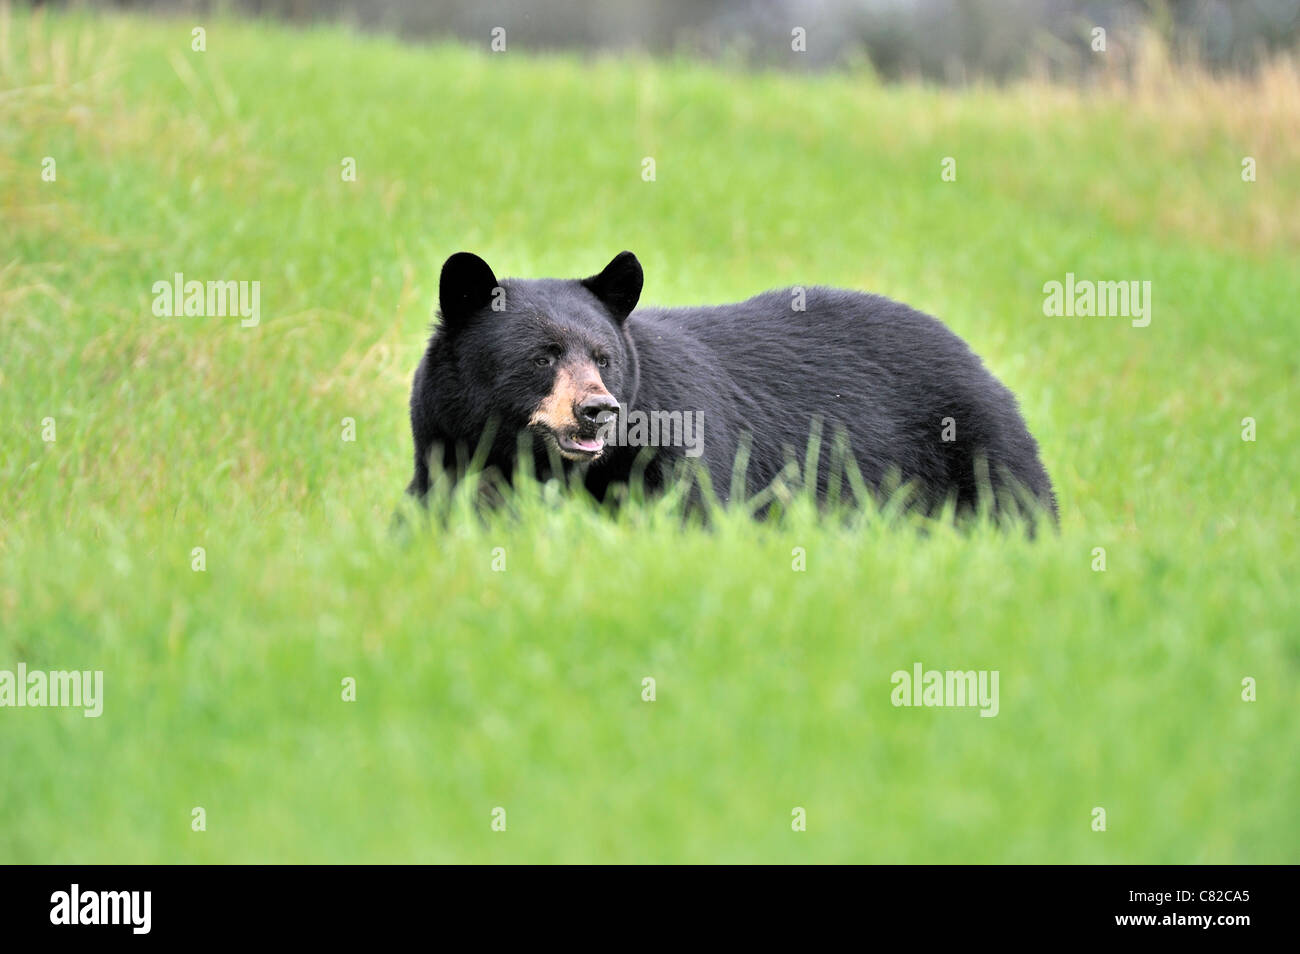 A side view of an adult black bear in a green grass meadow. Stock Photo